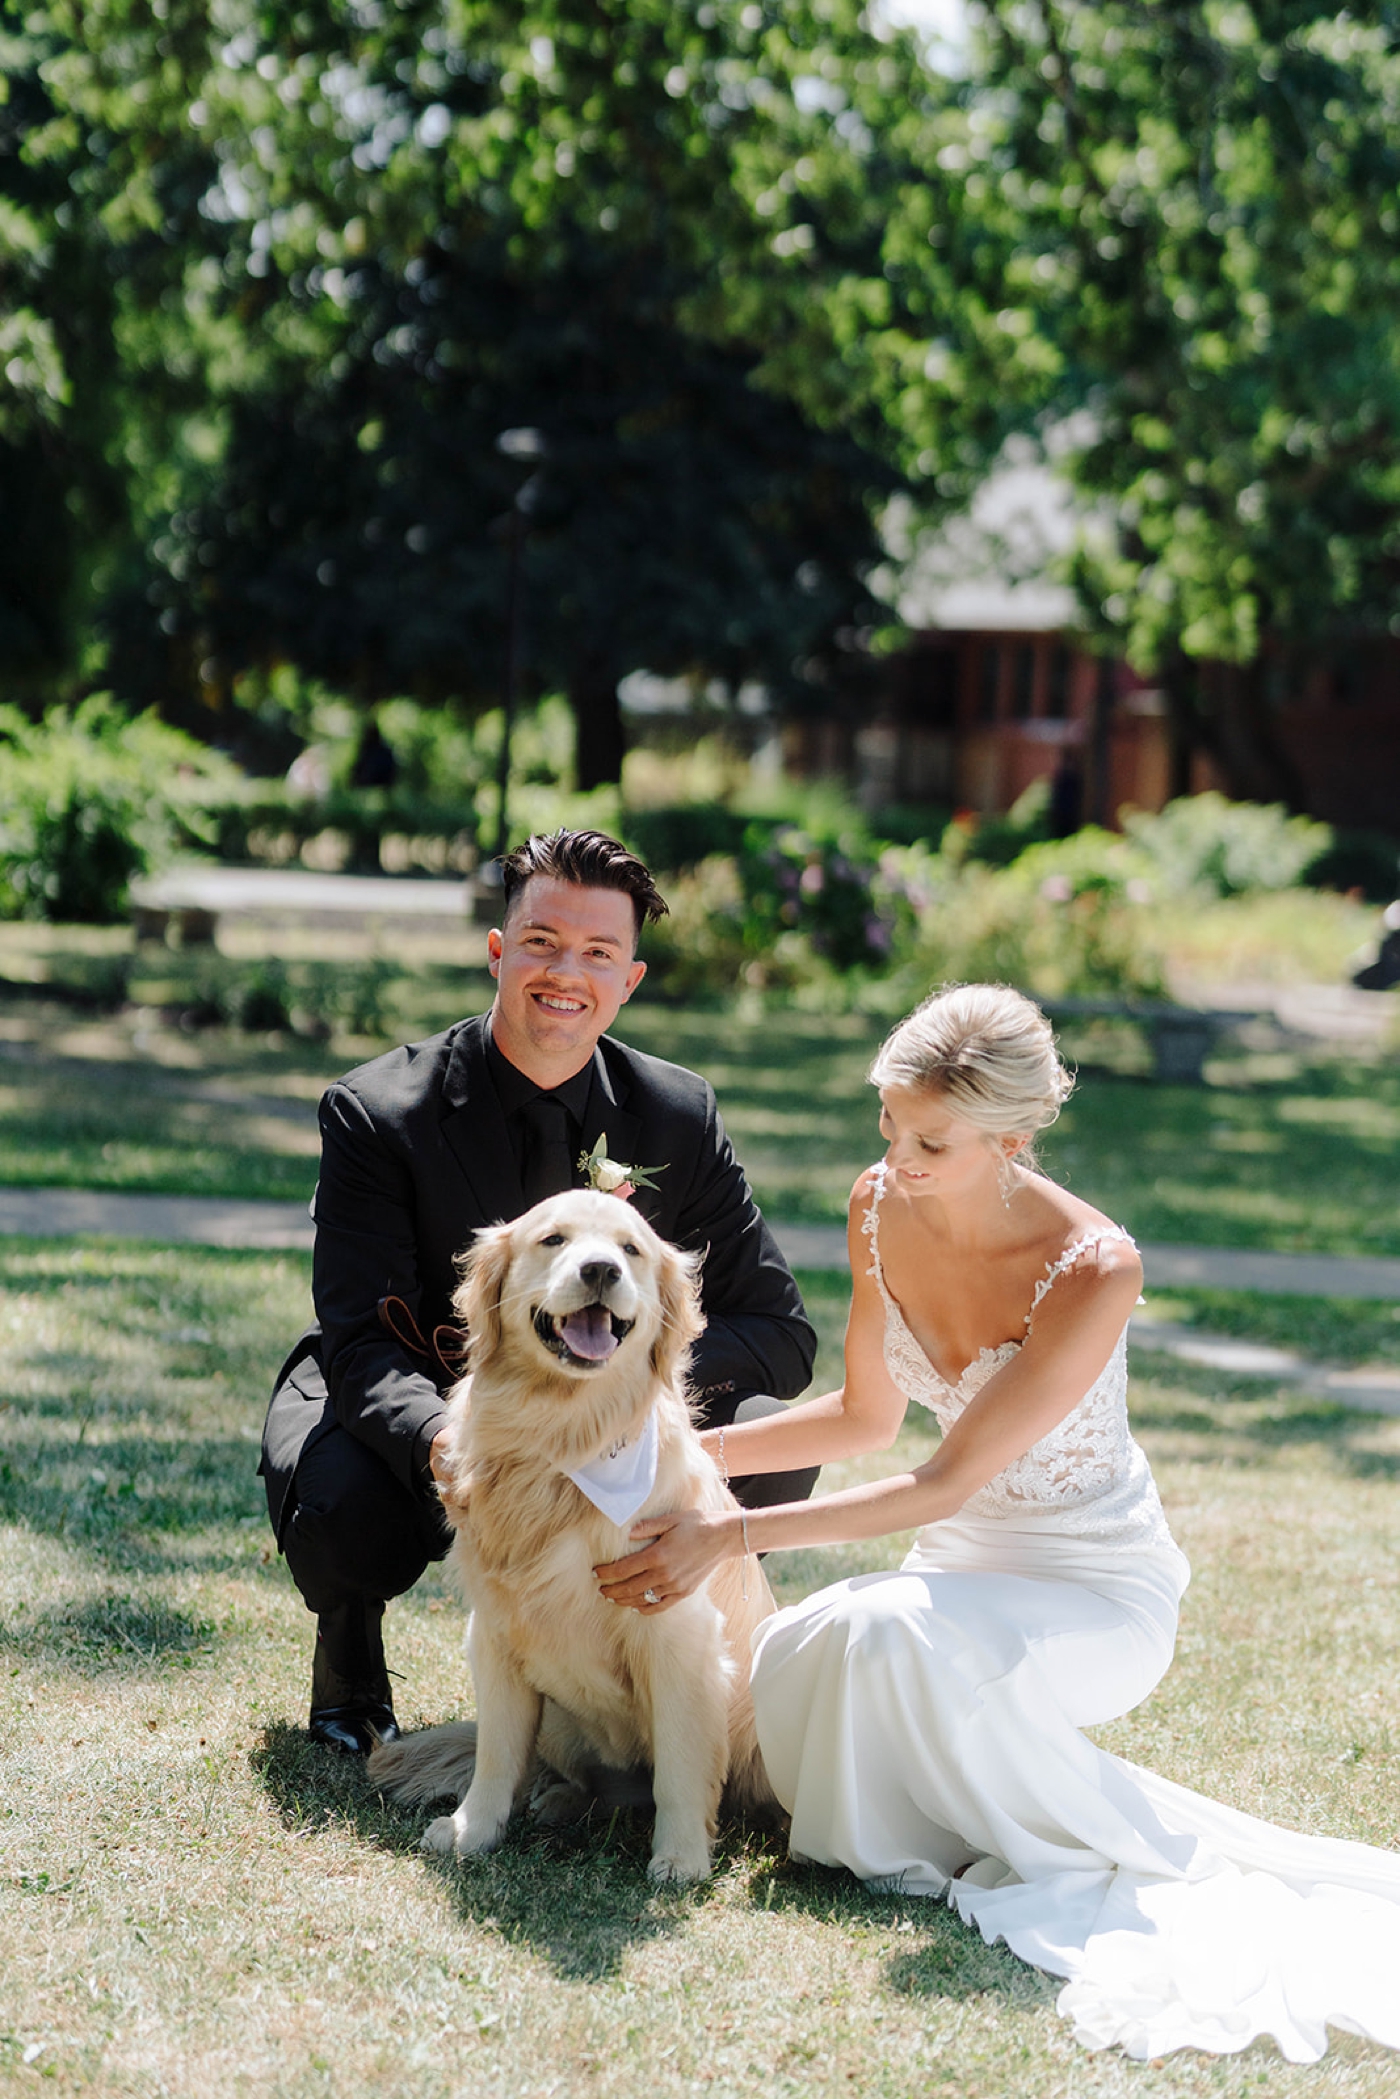 Bride and groom posing with their dog for their bridal portraits